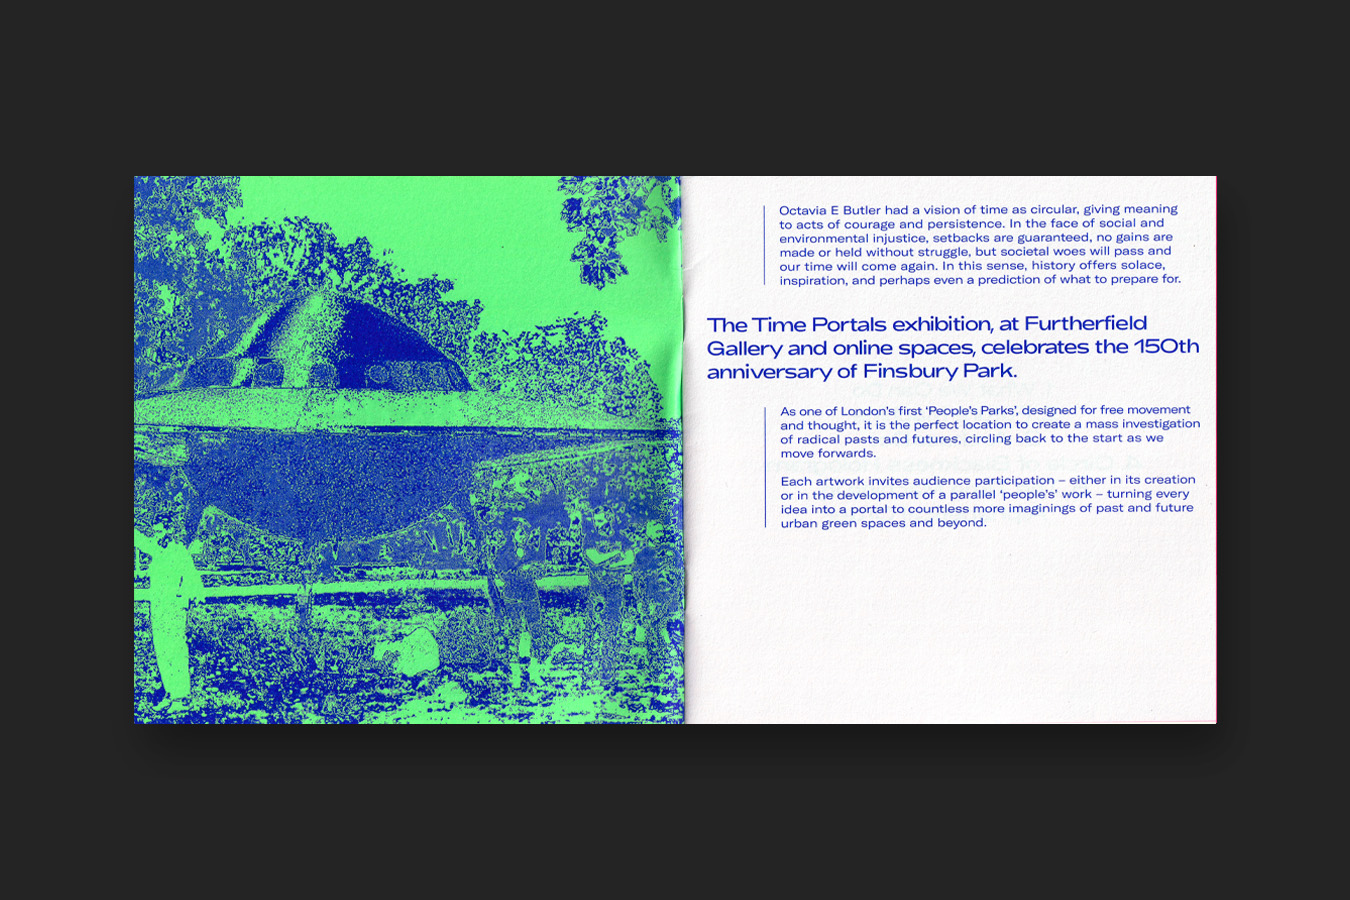 A scan time portals booklet with blue type. The left page shows a neon green and blue image of a spaceship which has a halftone effect on it, the right page has two paragraphs of text.